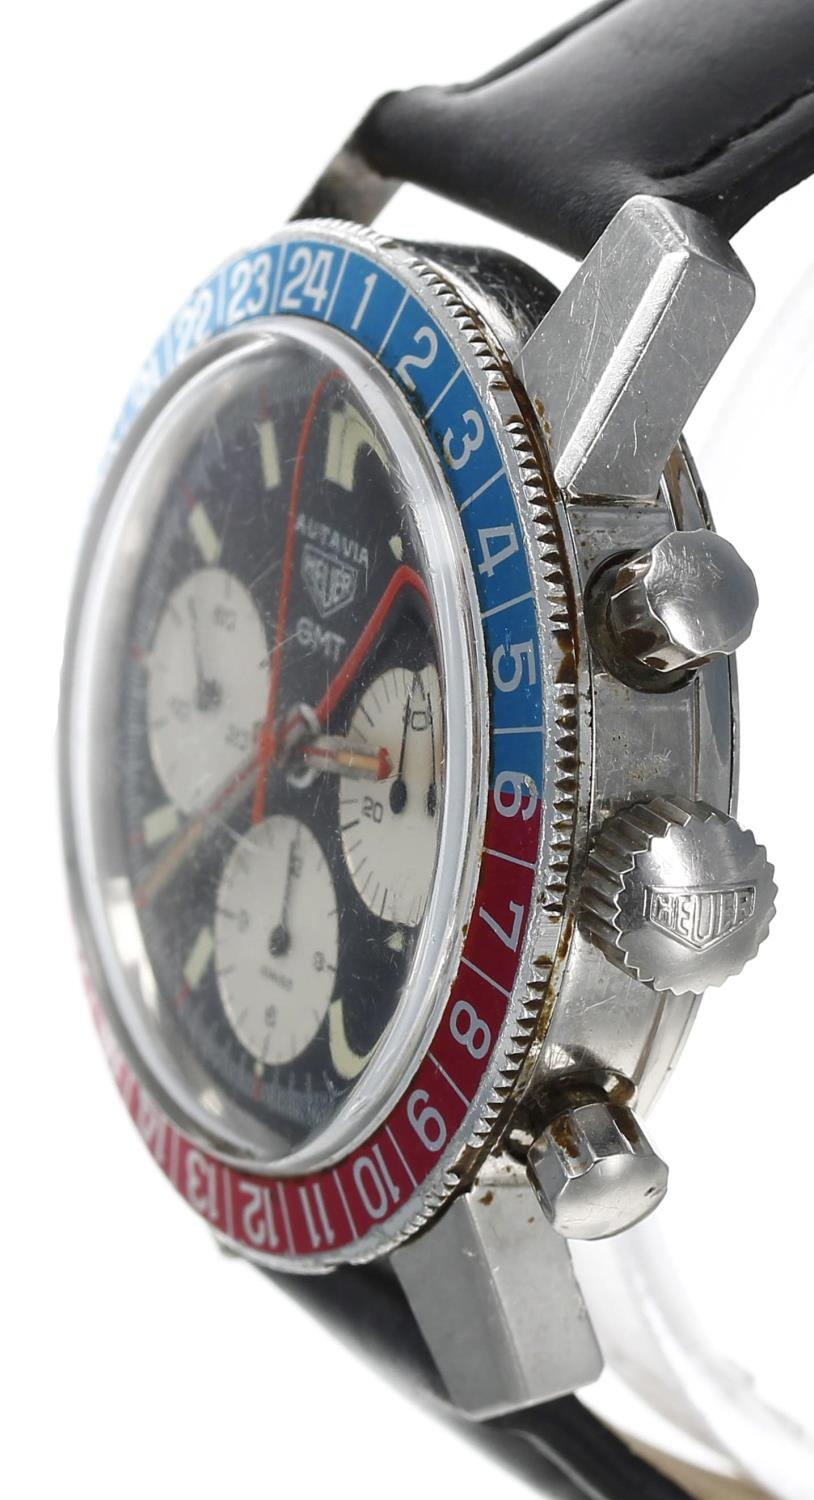 Rare Heuer Autavia GMT Chronograph stainless steel gentleman's wristwatch, reference no. 2446C, - Image 2 of 5